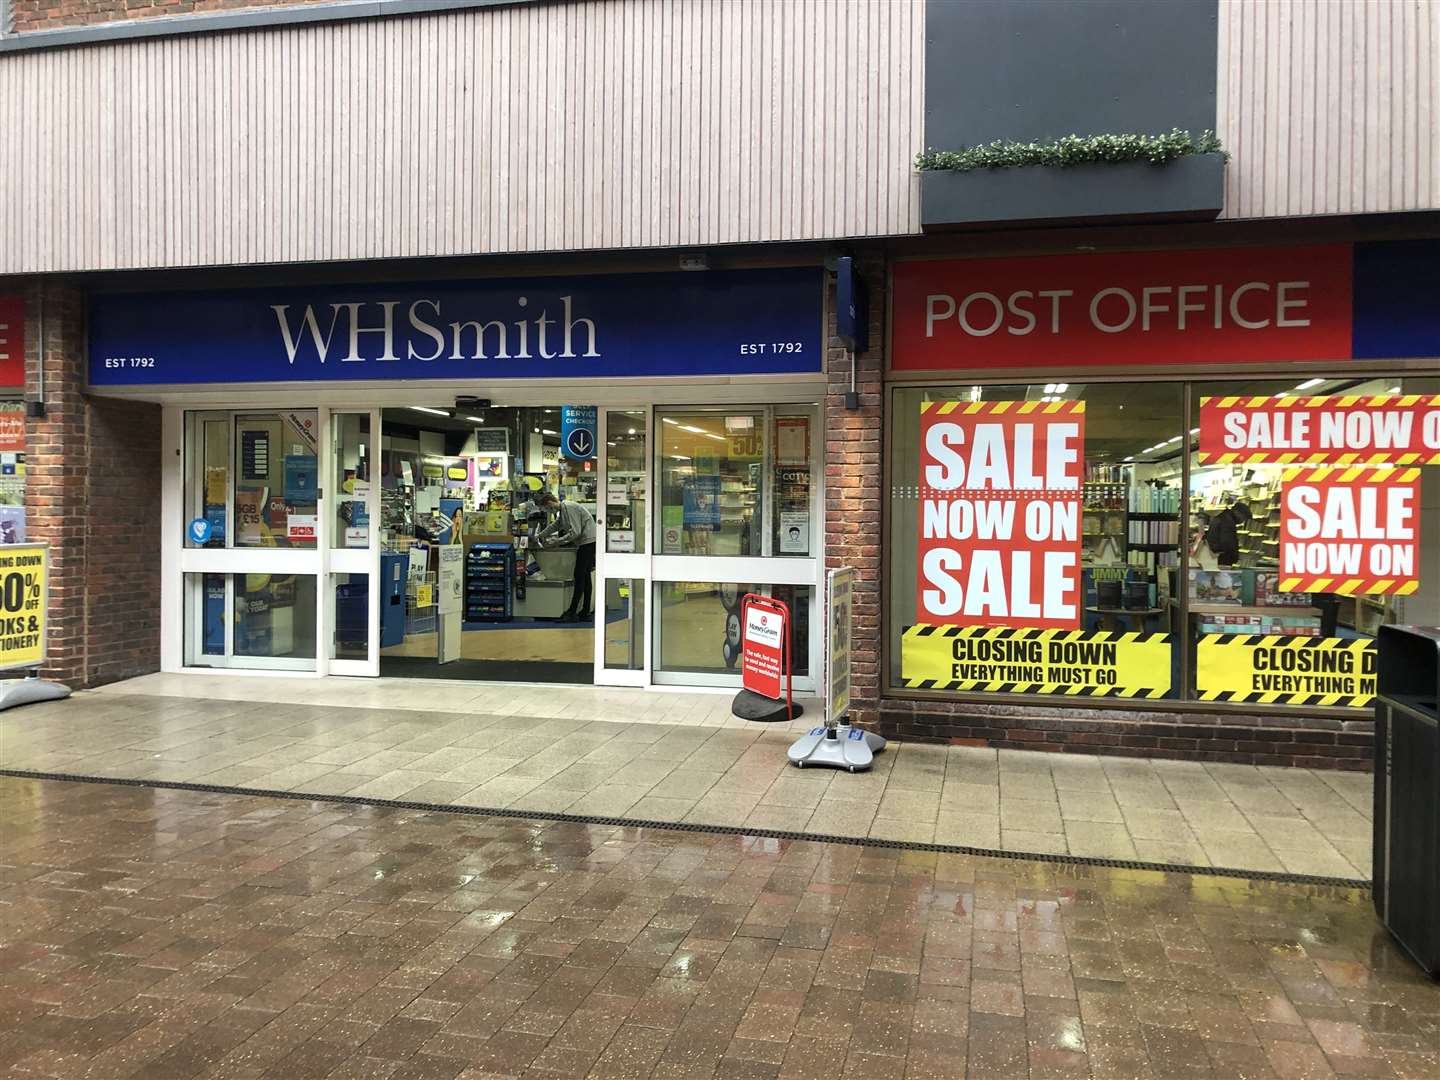 WHSmith is currently located in the town centre